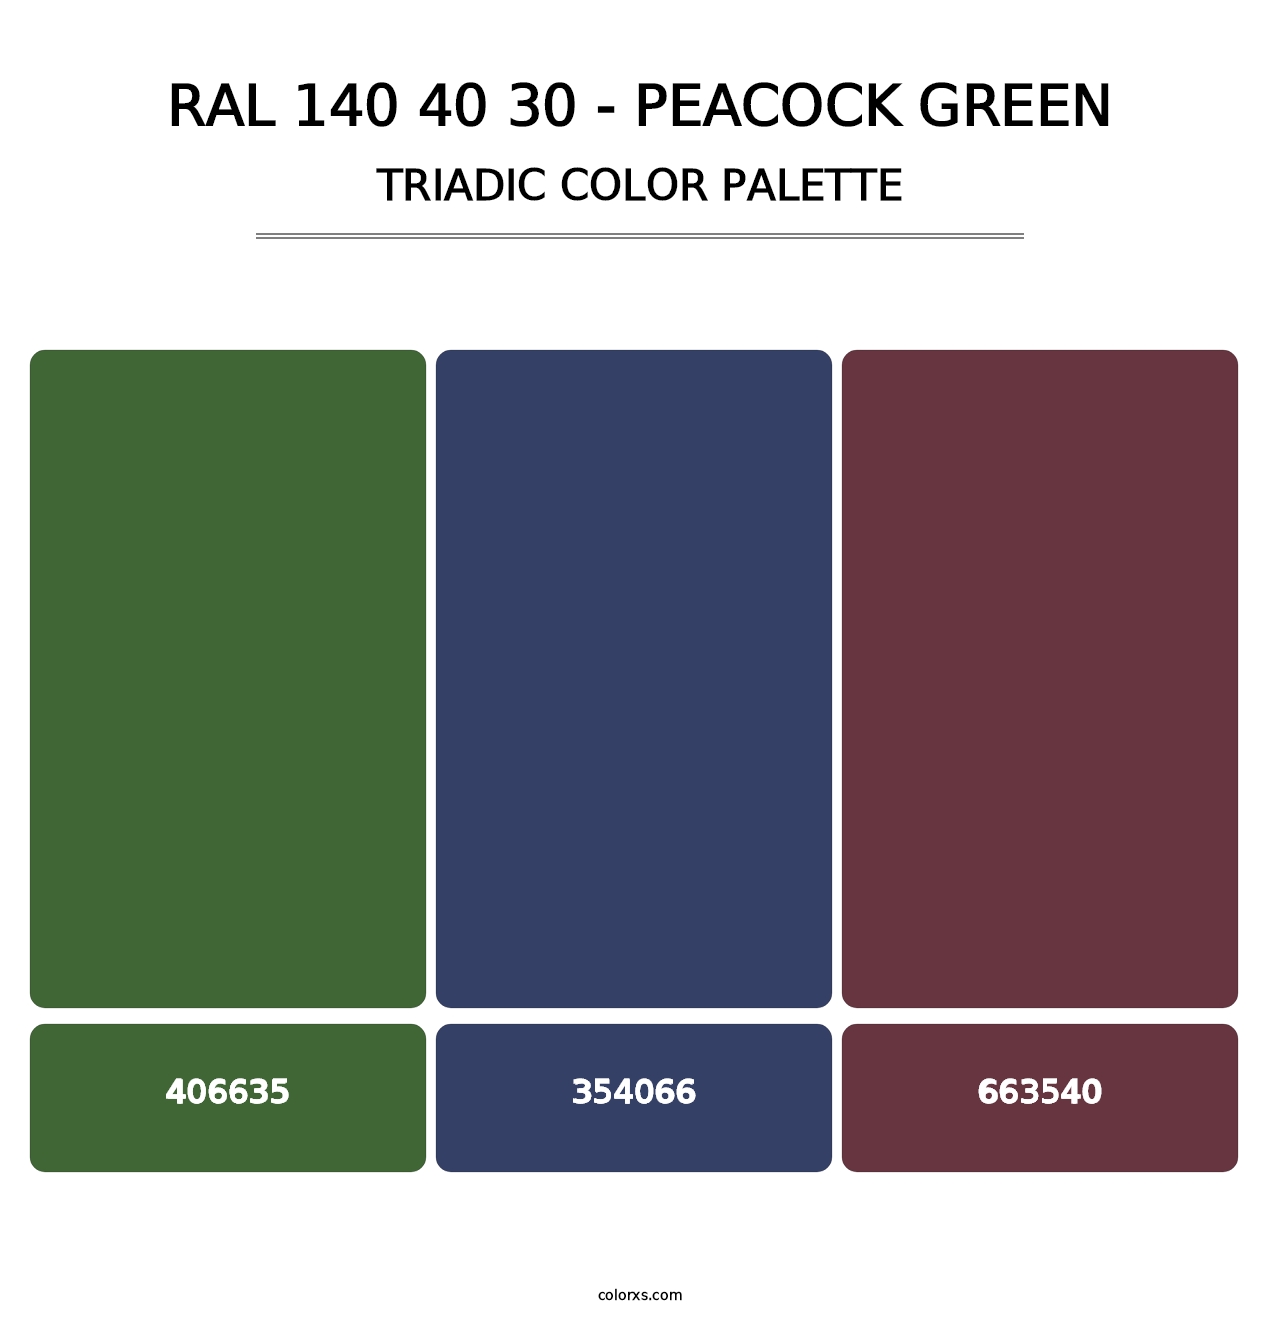 RAL 140 40 30 - Peacock Green - Triadic Color Palette